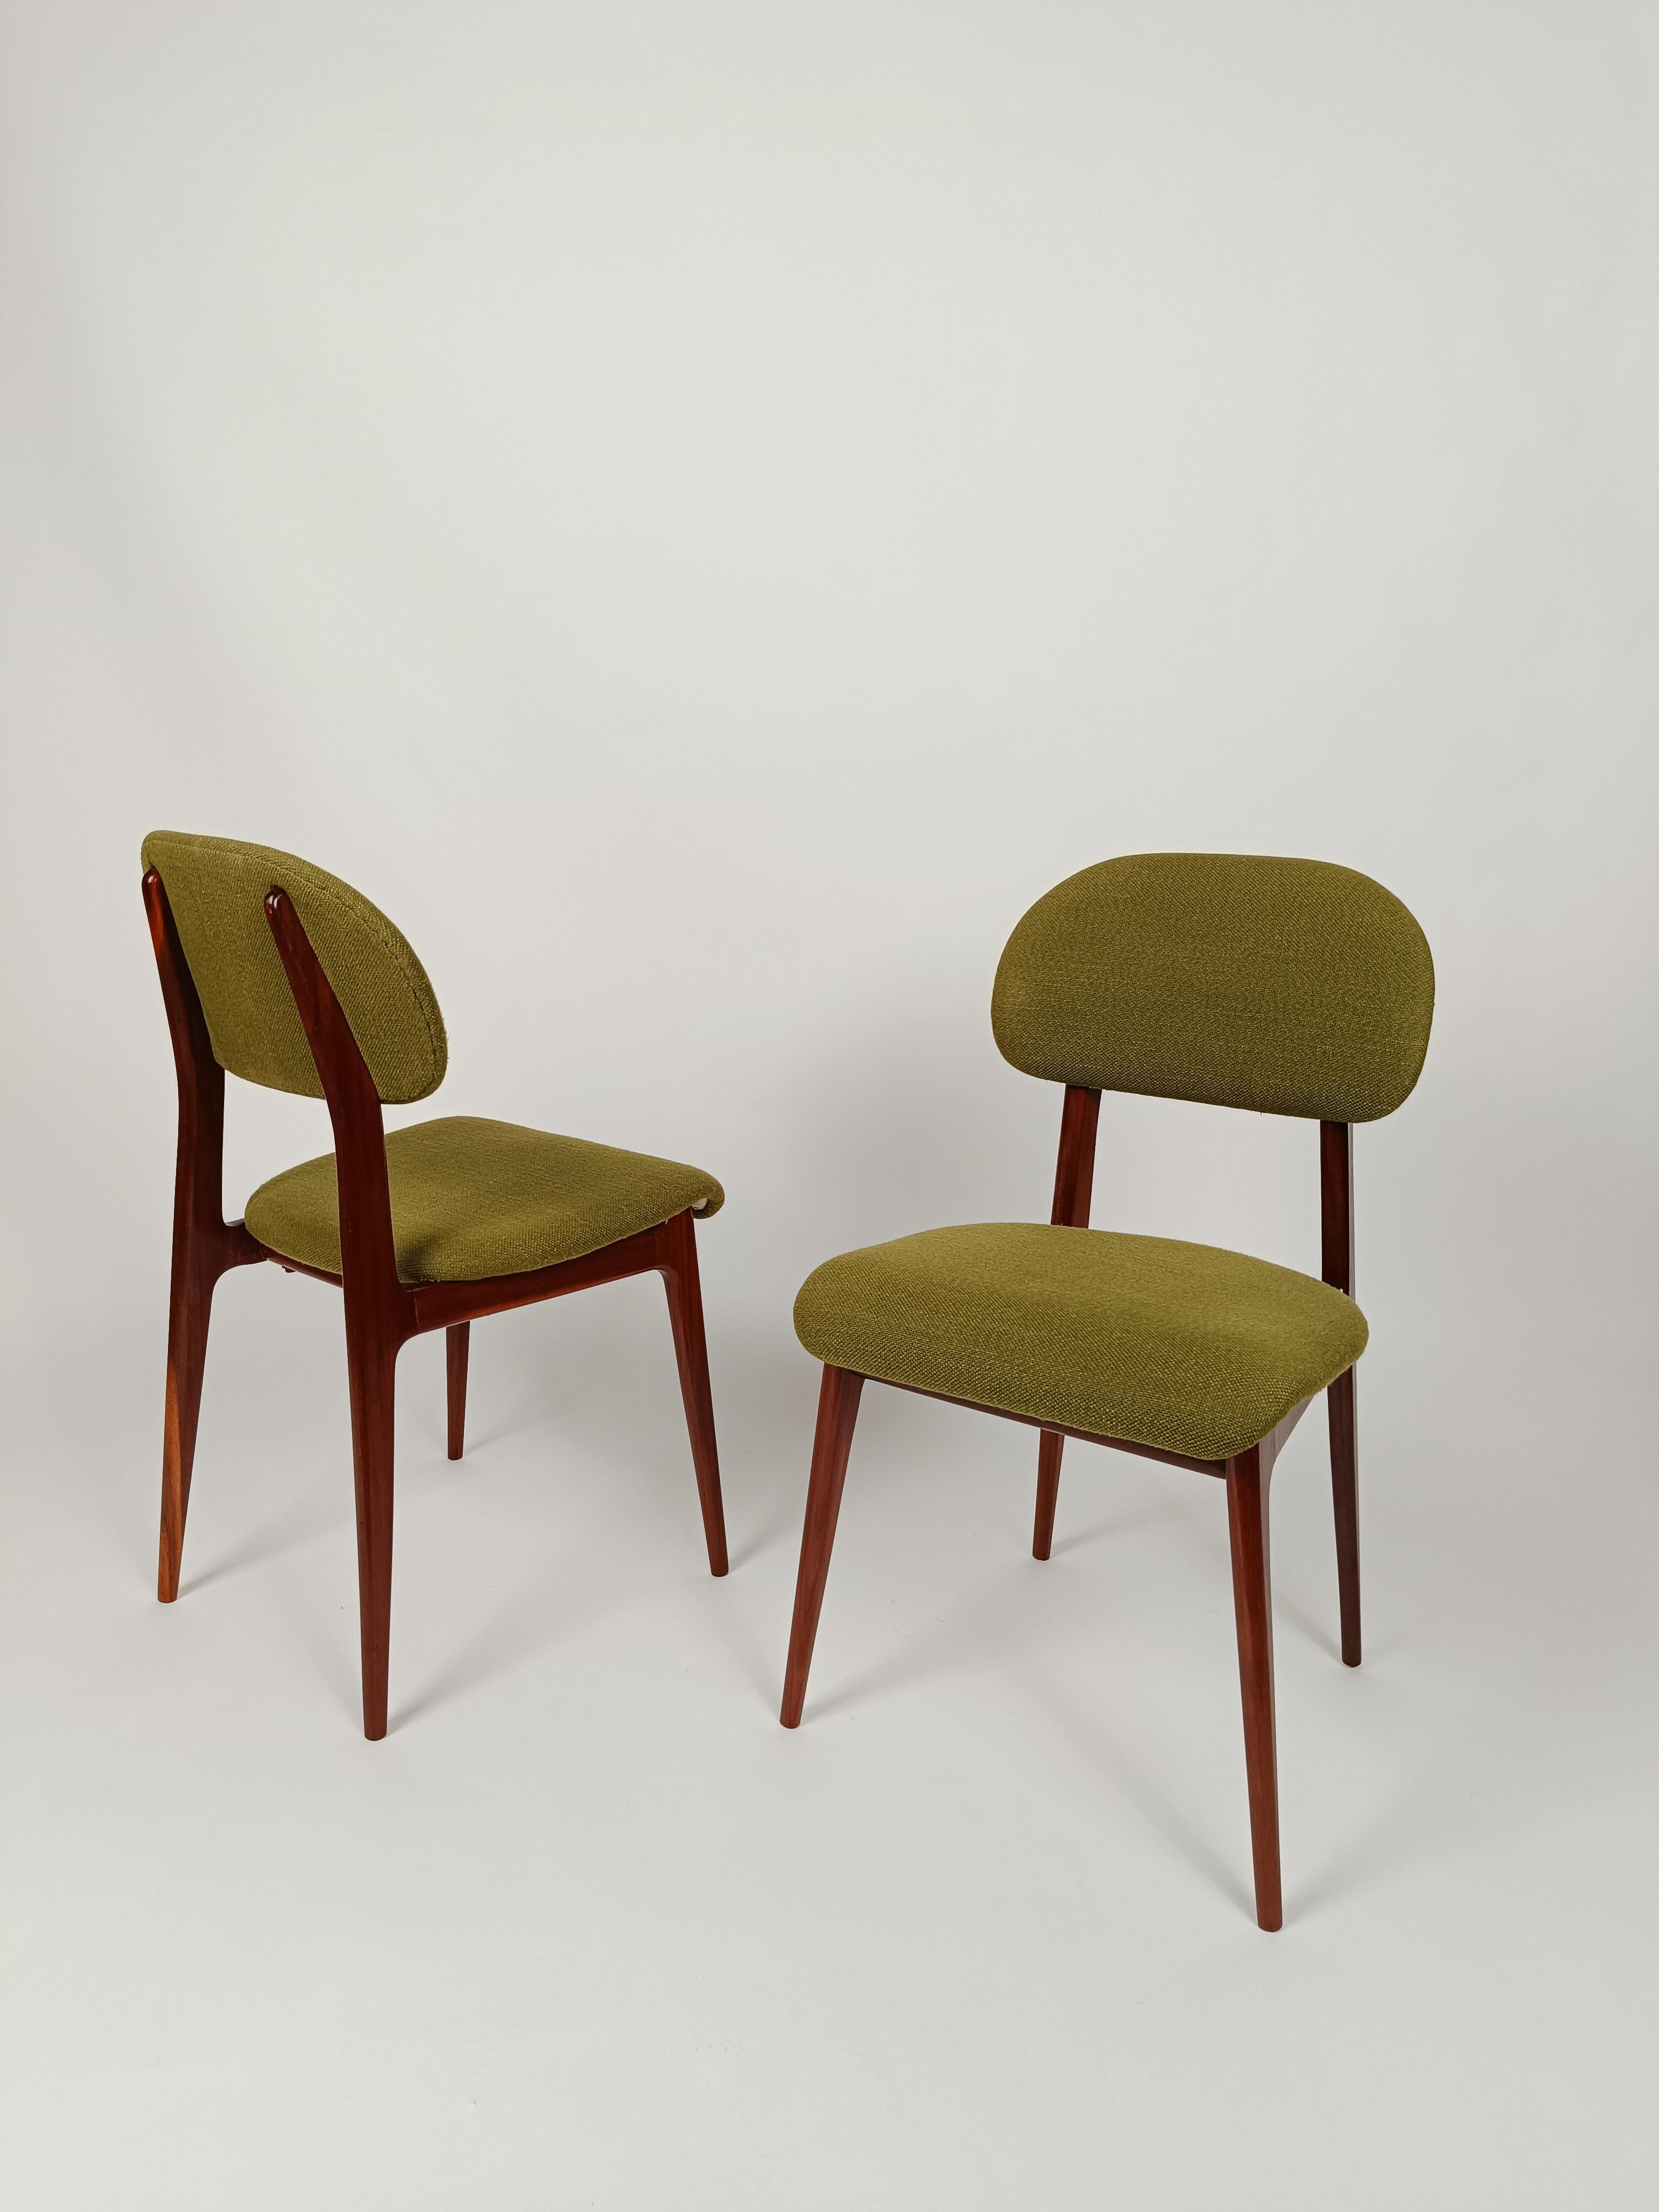 Italian Midcentury Chairs Attributed to Carlo Hauner and Martin Eisler, 1960s For Sale 8